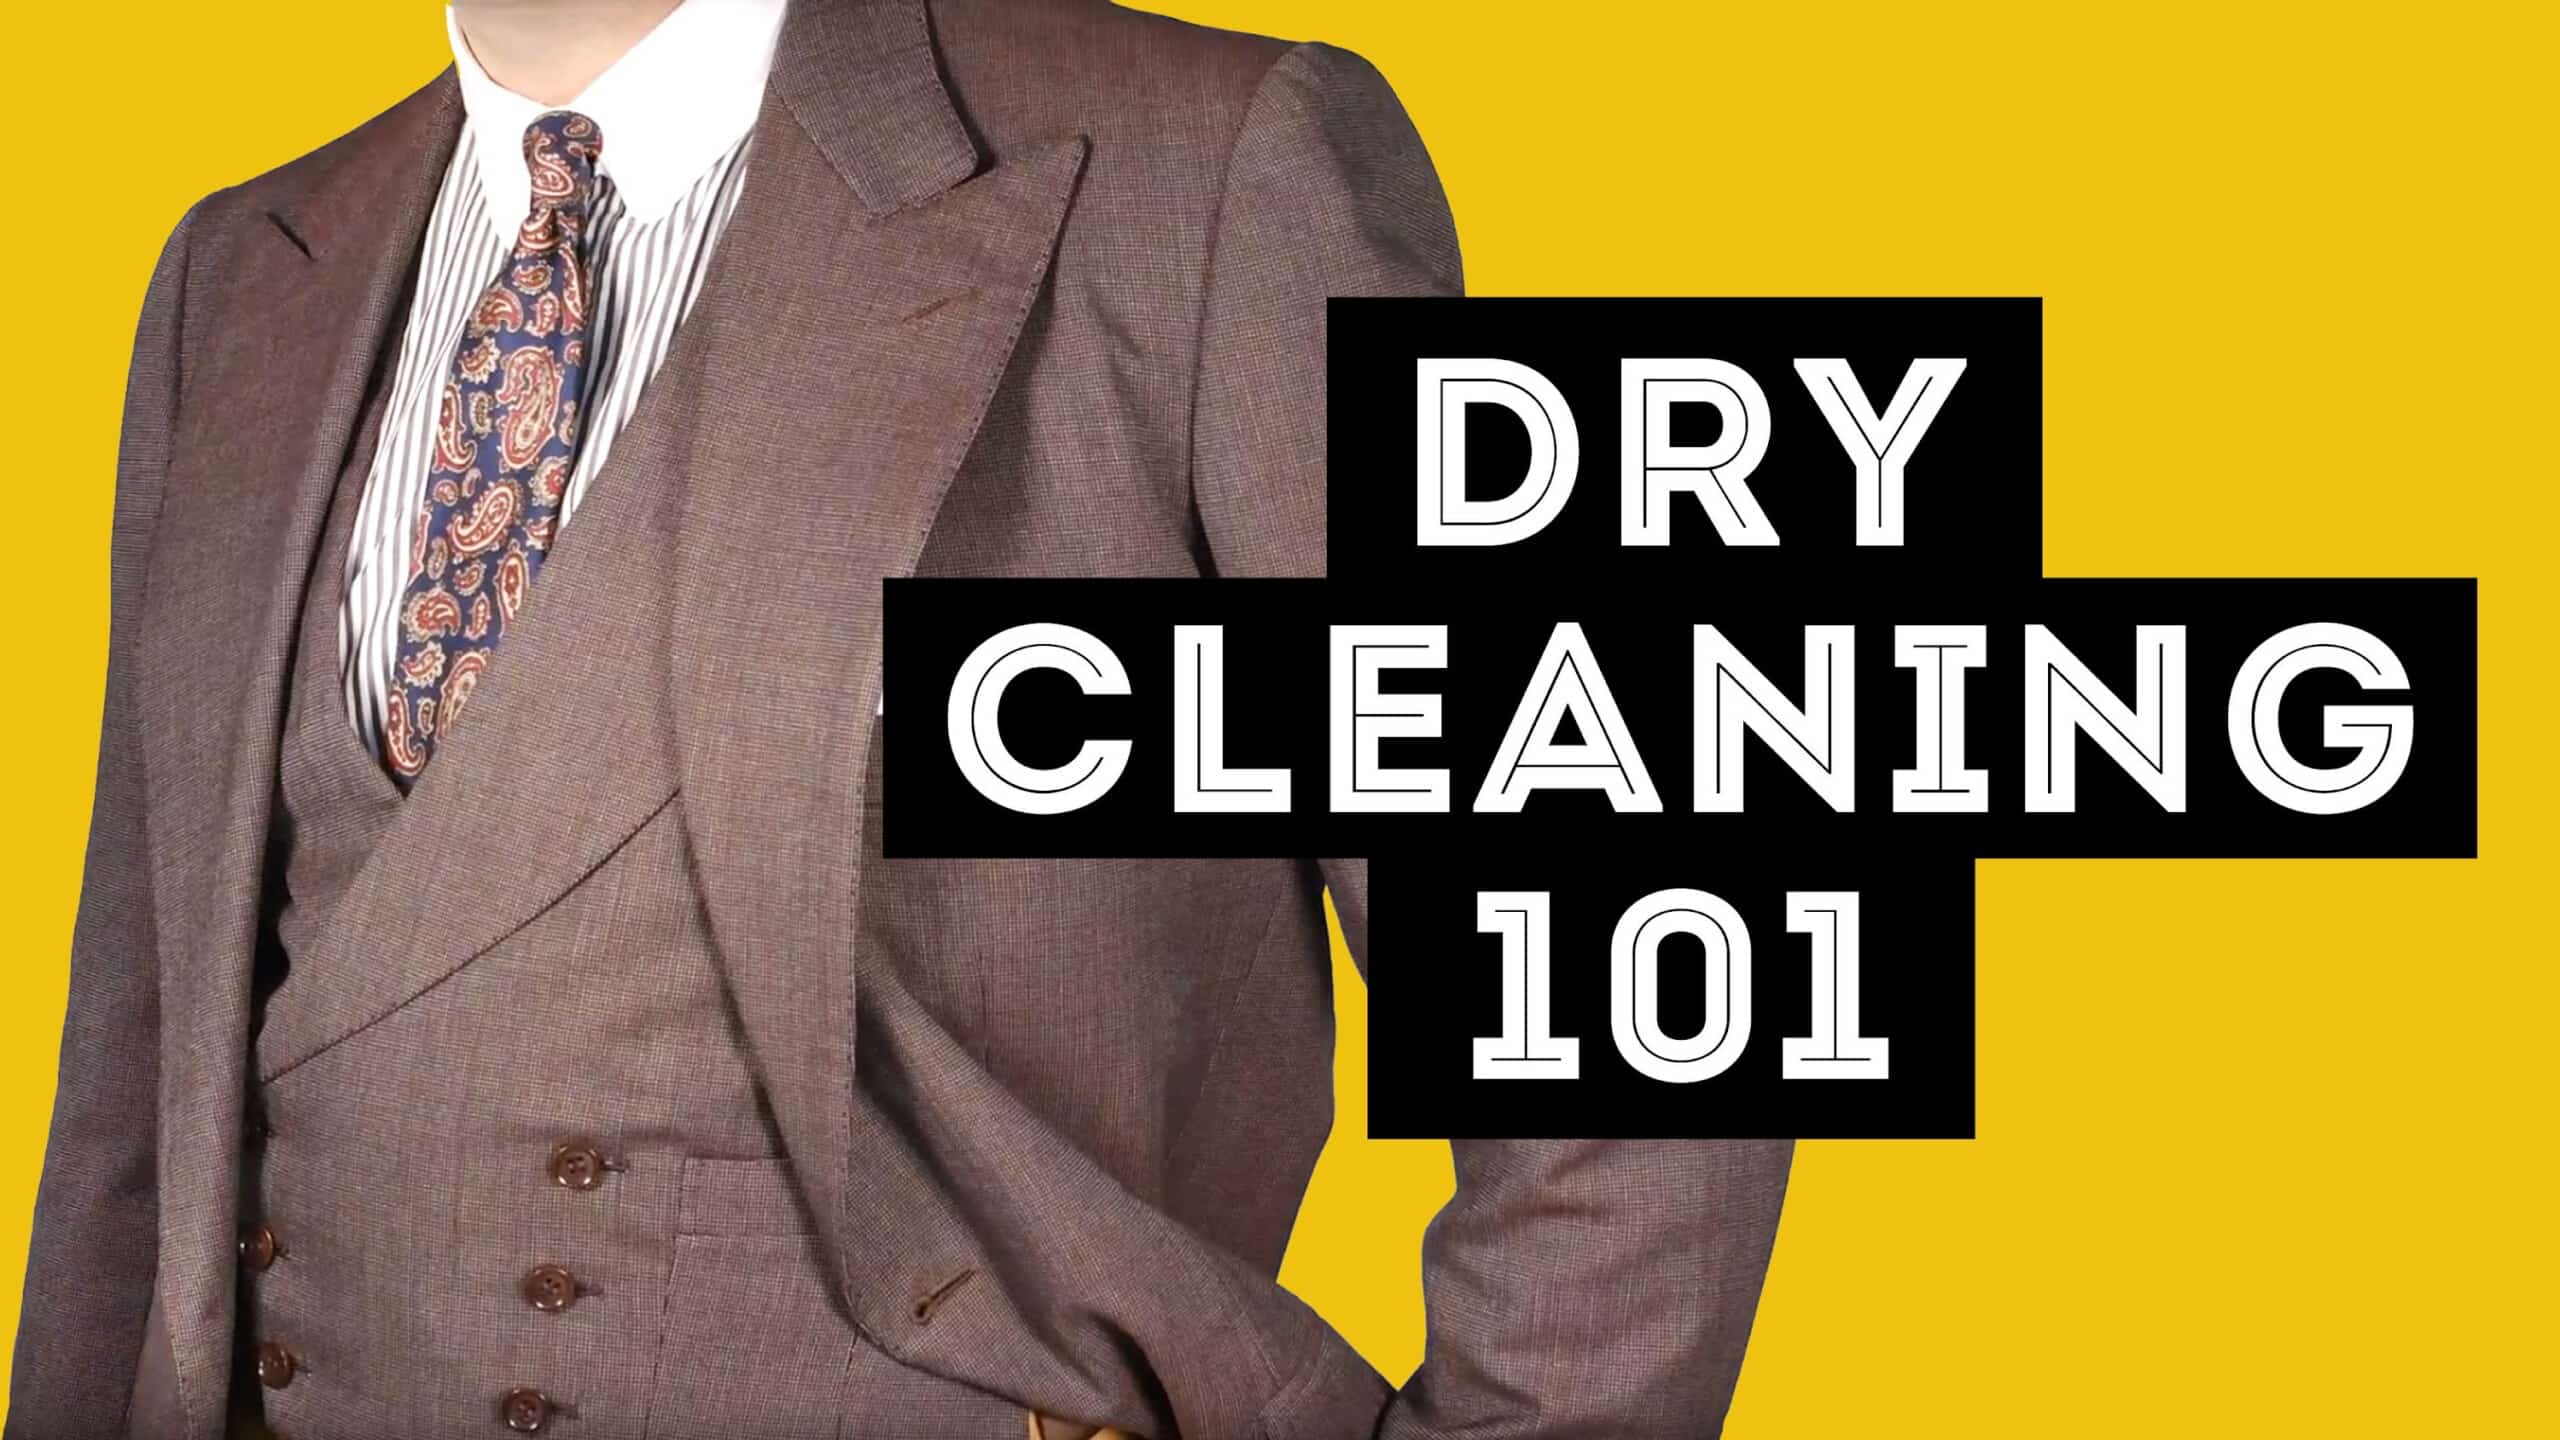 dry cleaning 101 3840x2160 scaled